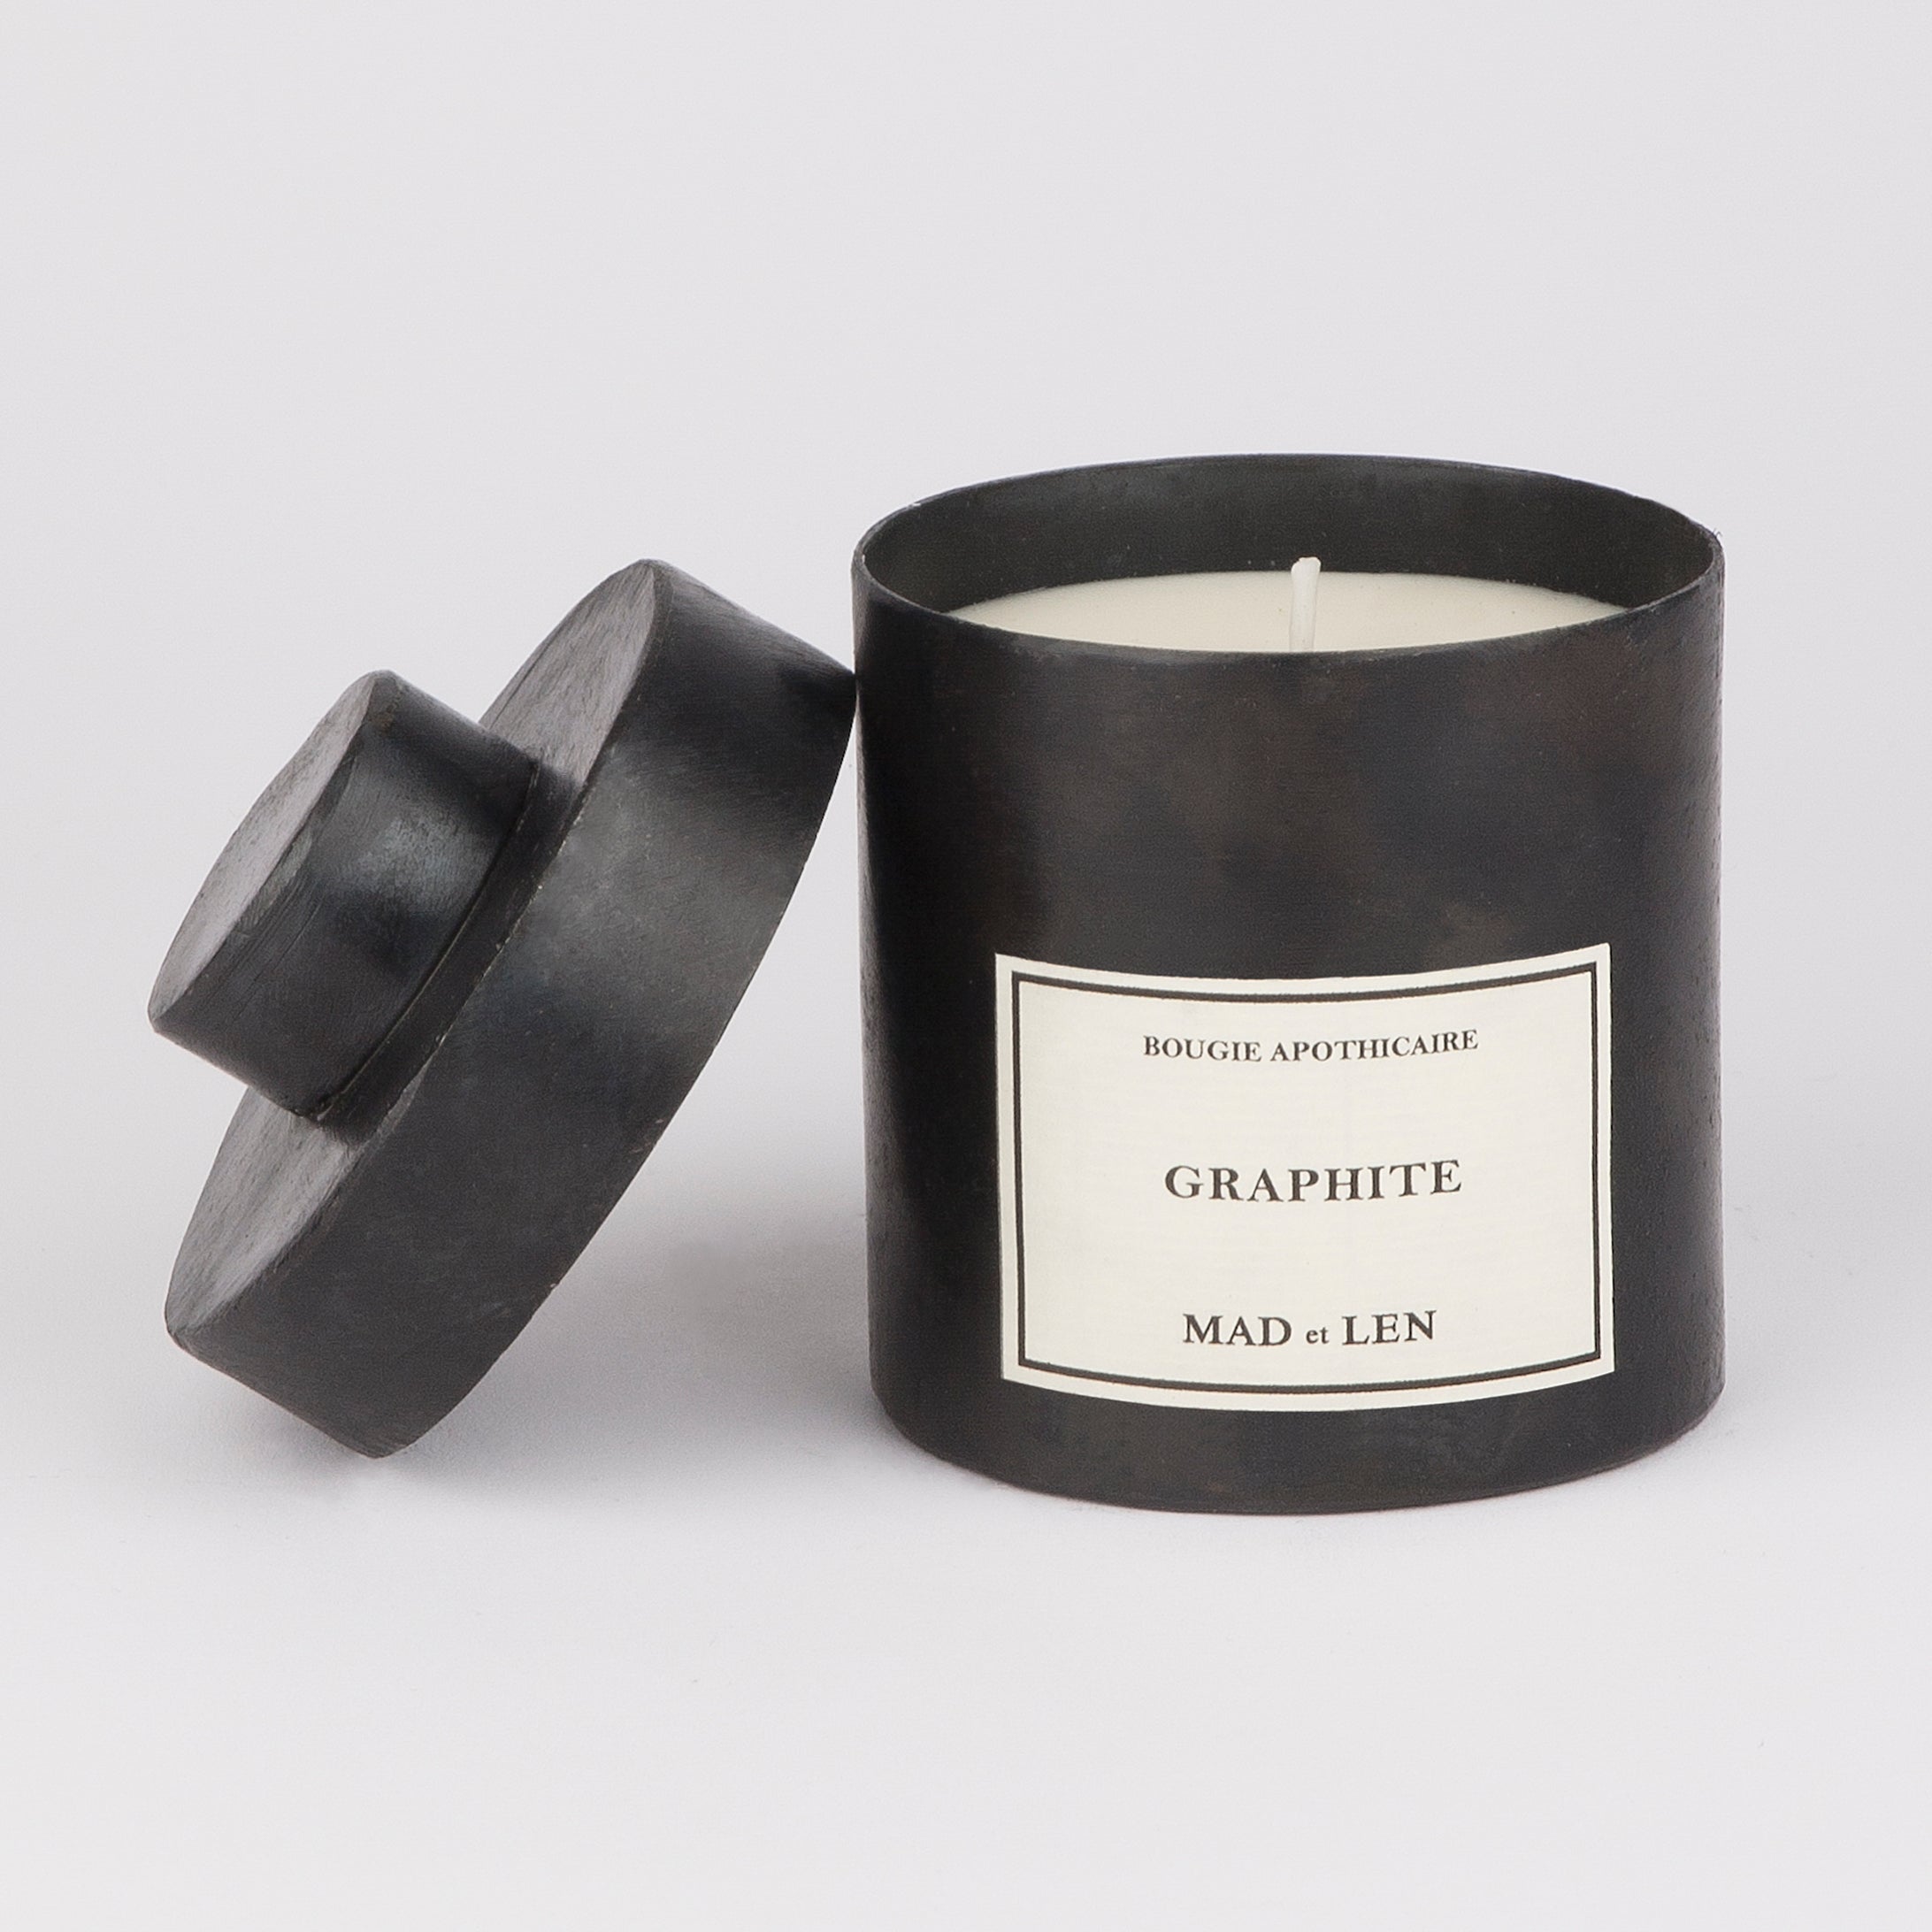 MAD ET LEN - SCENTED CANDLE - GRAPHITE- 300g